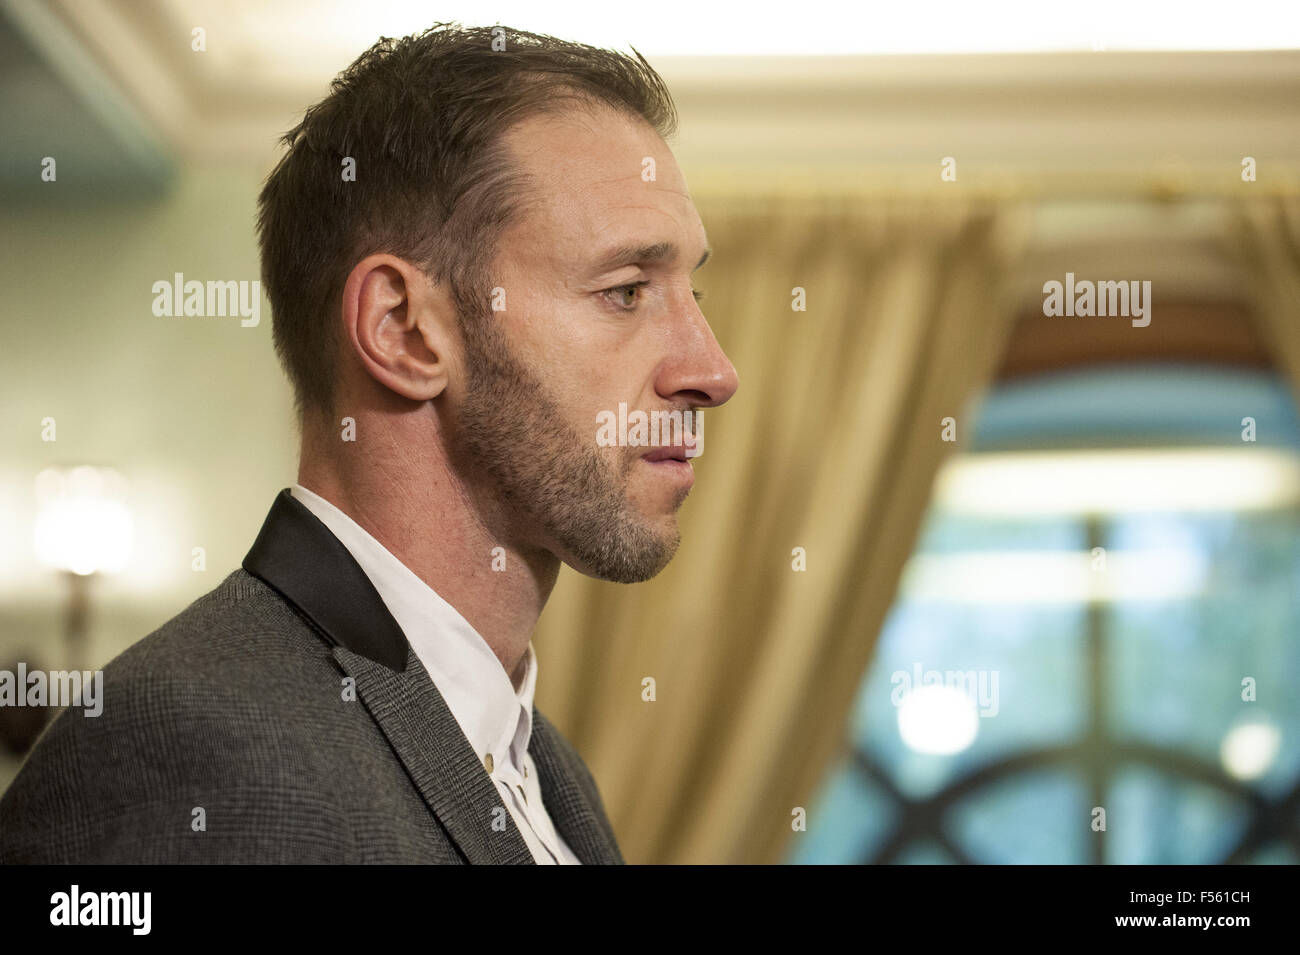 Oct. 28, 2015 - Moscow, Russia - <b>Enzo Maccarinelli</b> is seen during the ... - oct-28-2015-moscow-russia-enzo-maccarinelli-is-seen-during-the-conference-F561CH